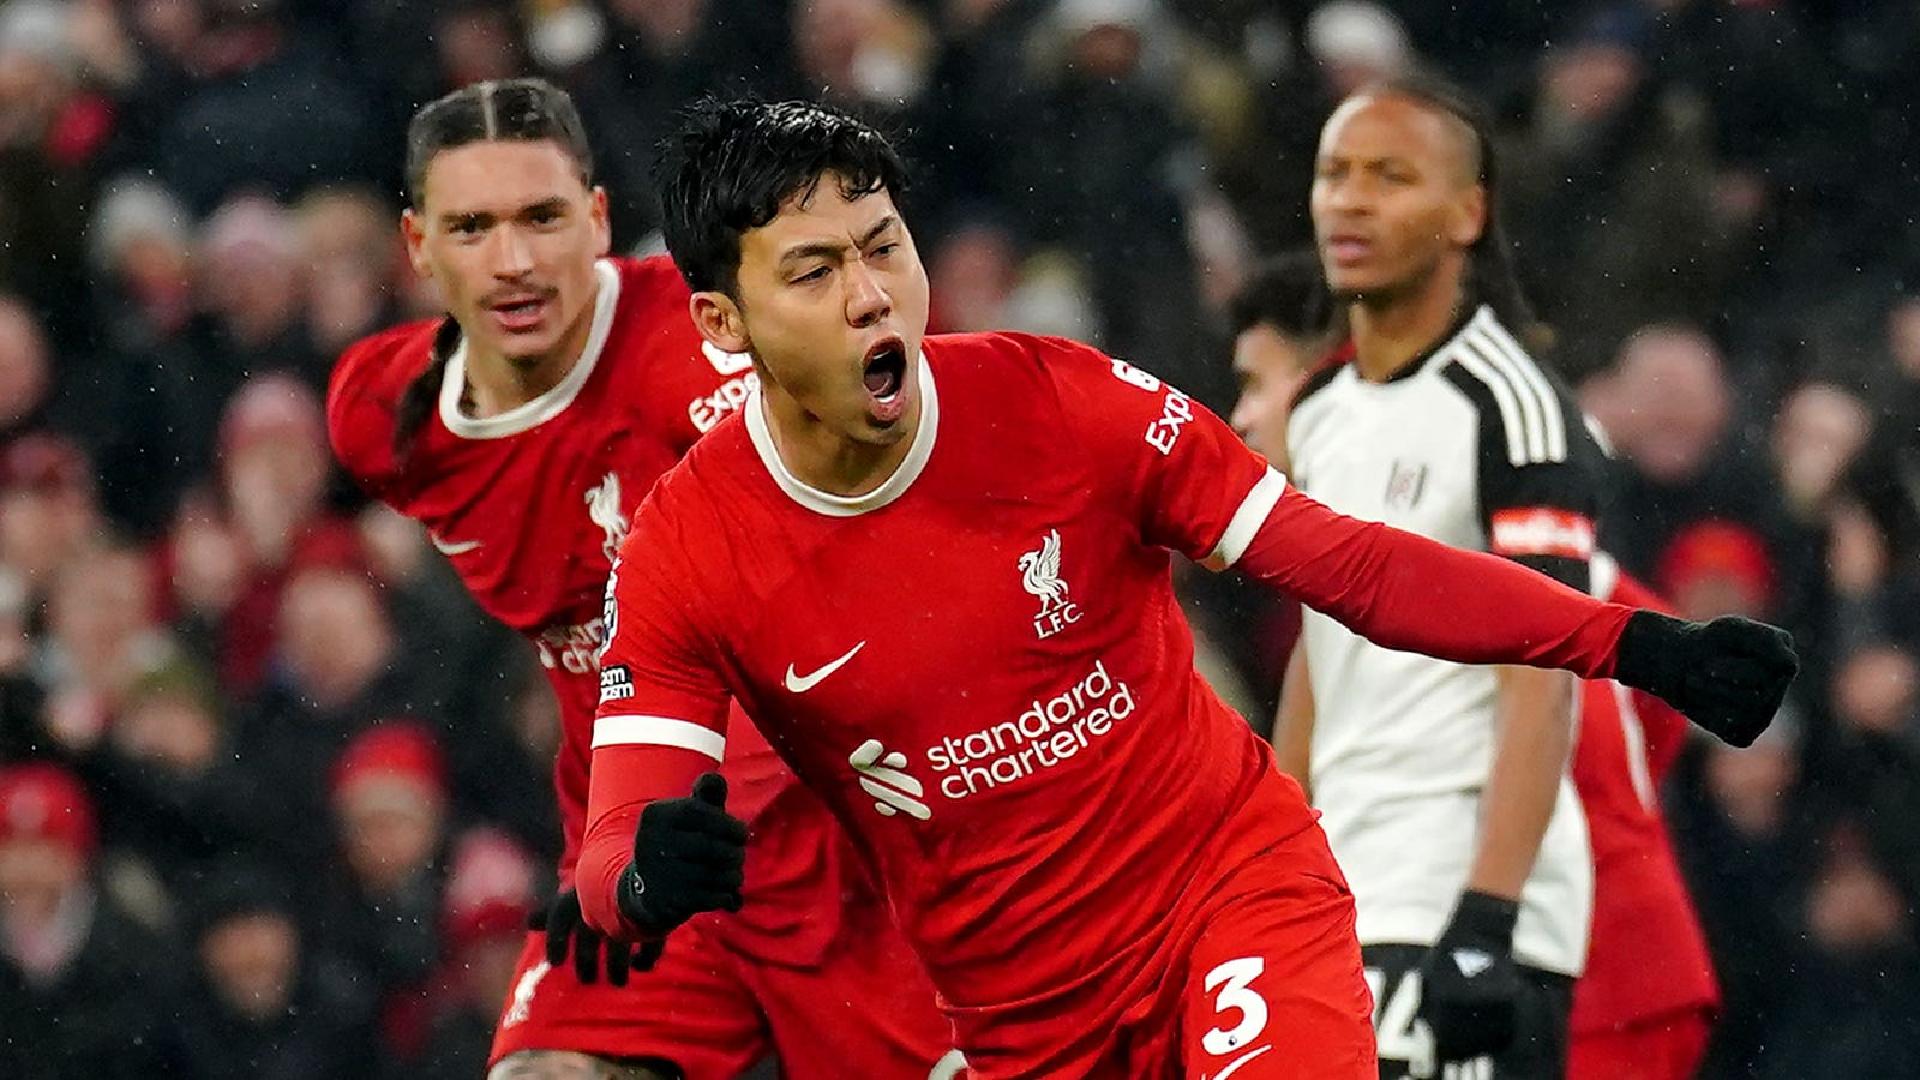 Liverpool stage late comeback to edge dramatic victory over Fulham at Anfield